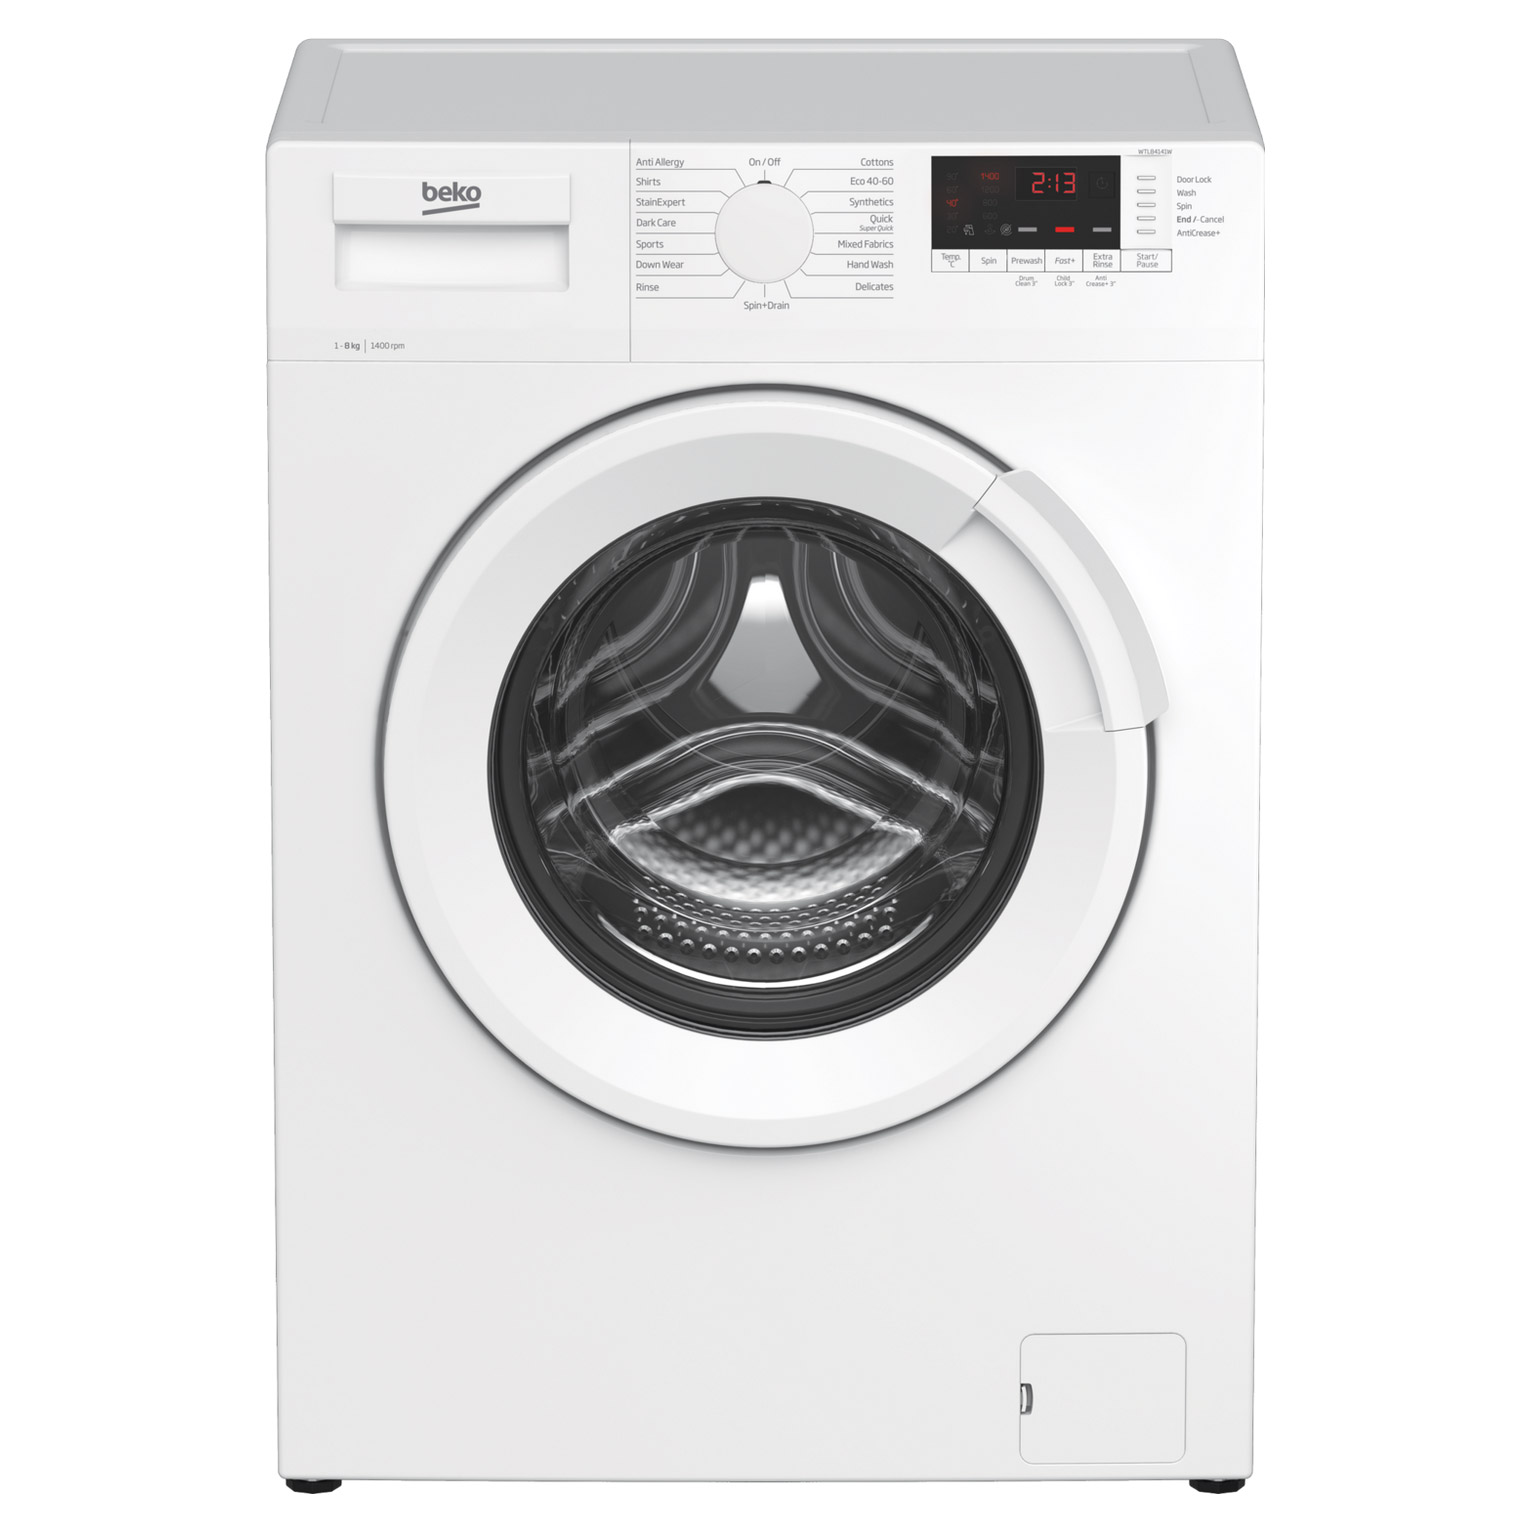 Image of Beko WTL84141W Washing Machine in White 1400rpm 8Kg C Rated